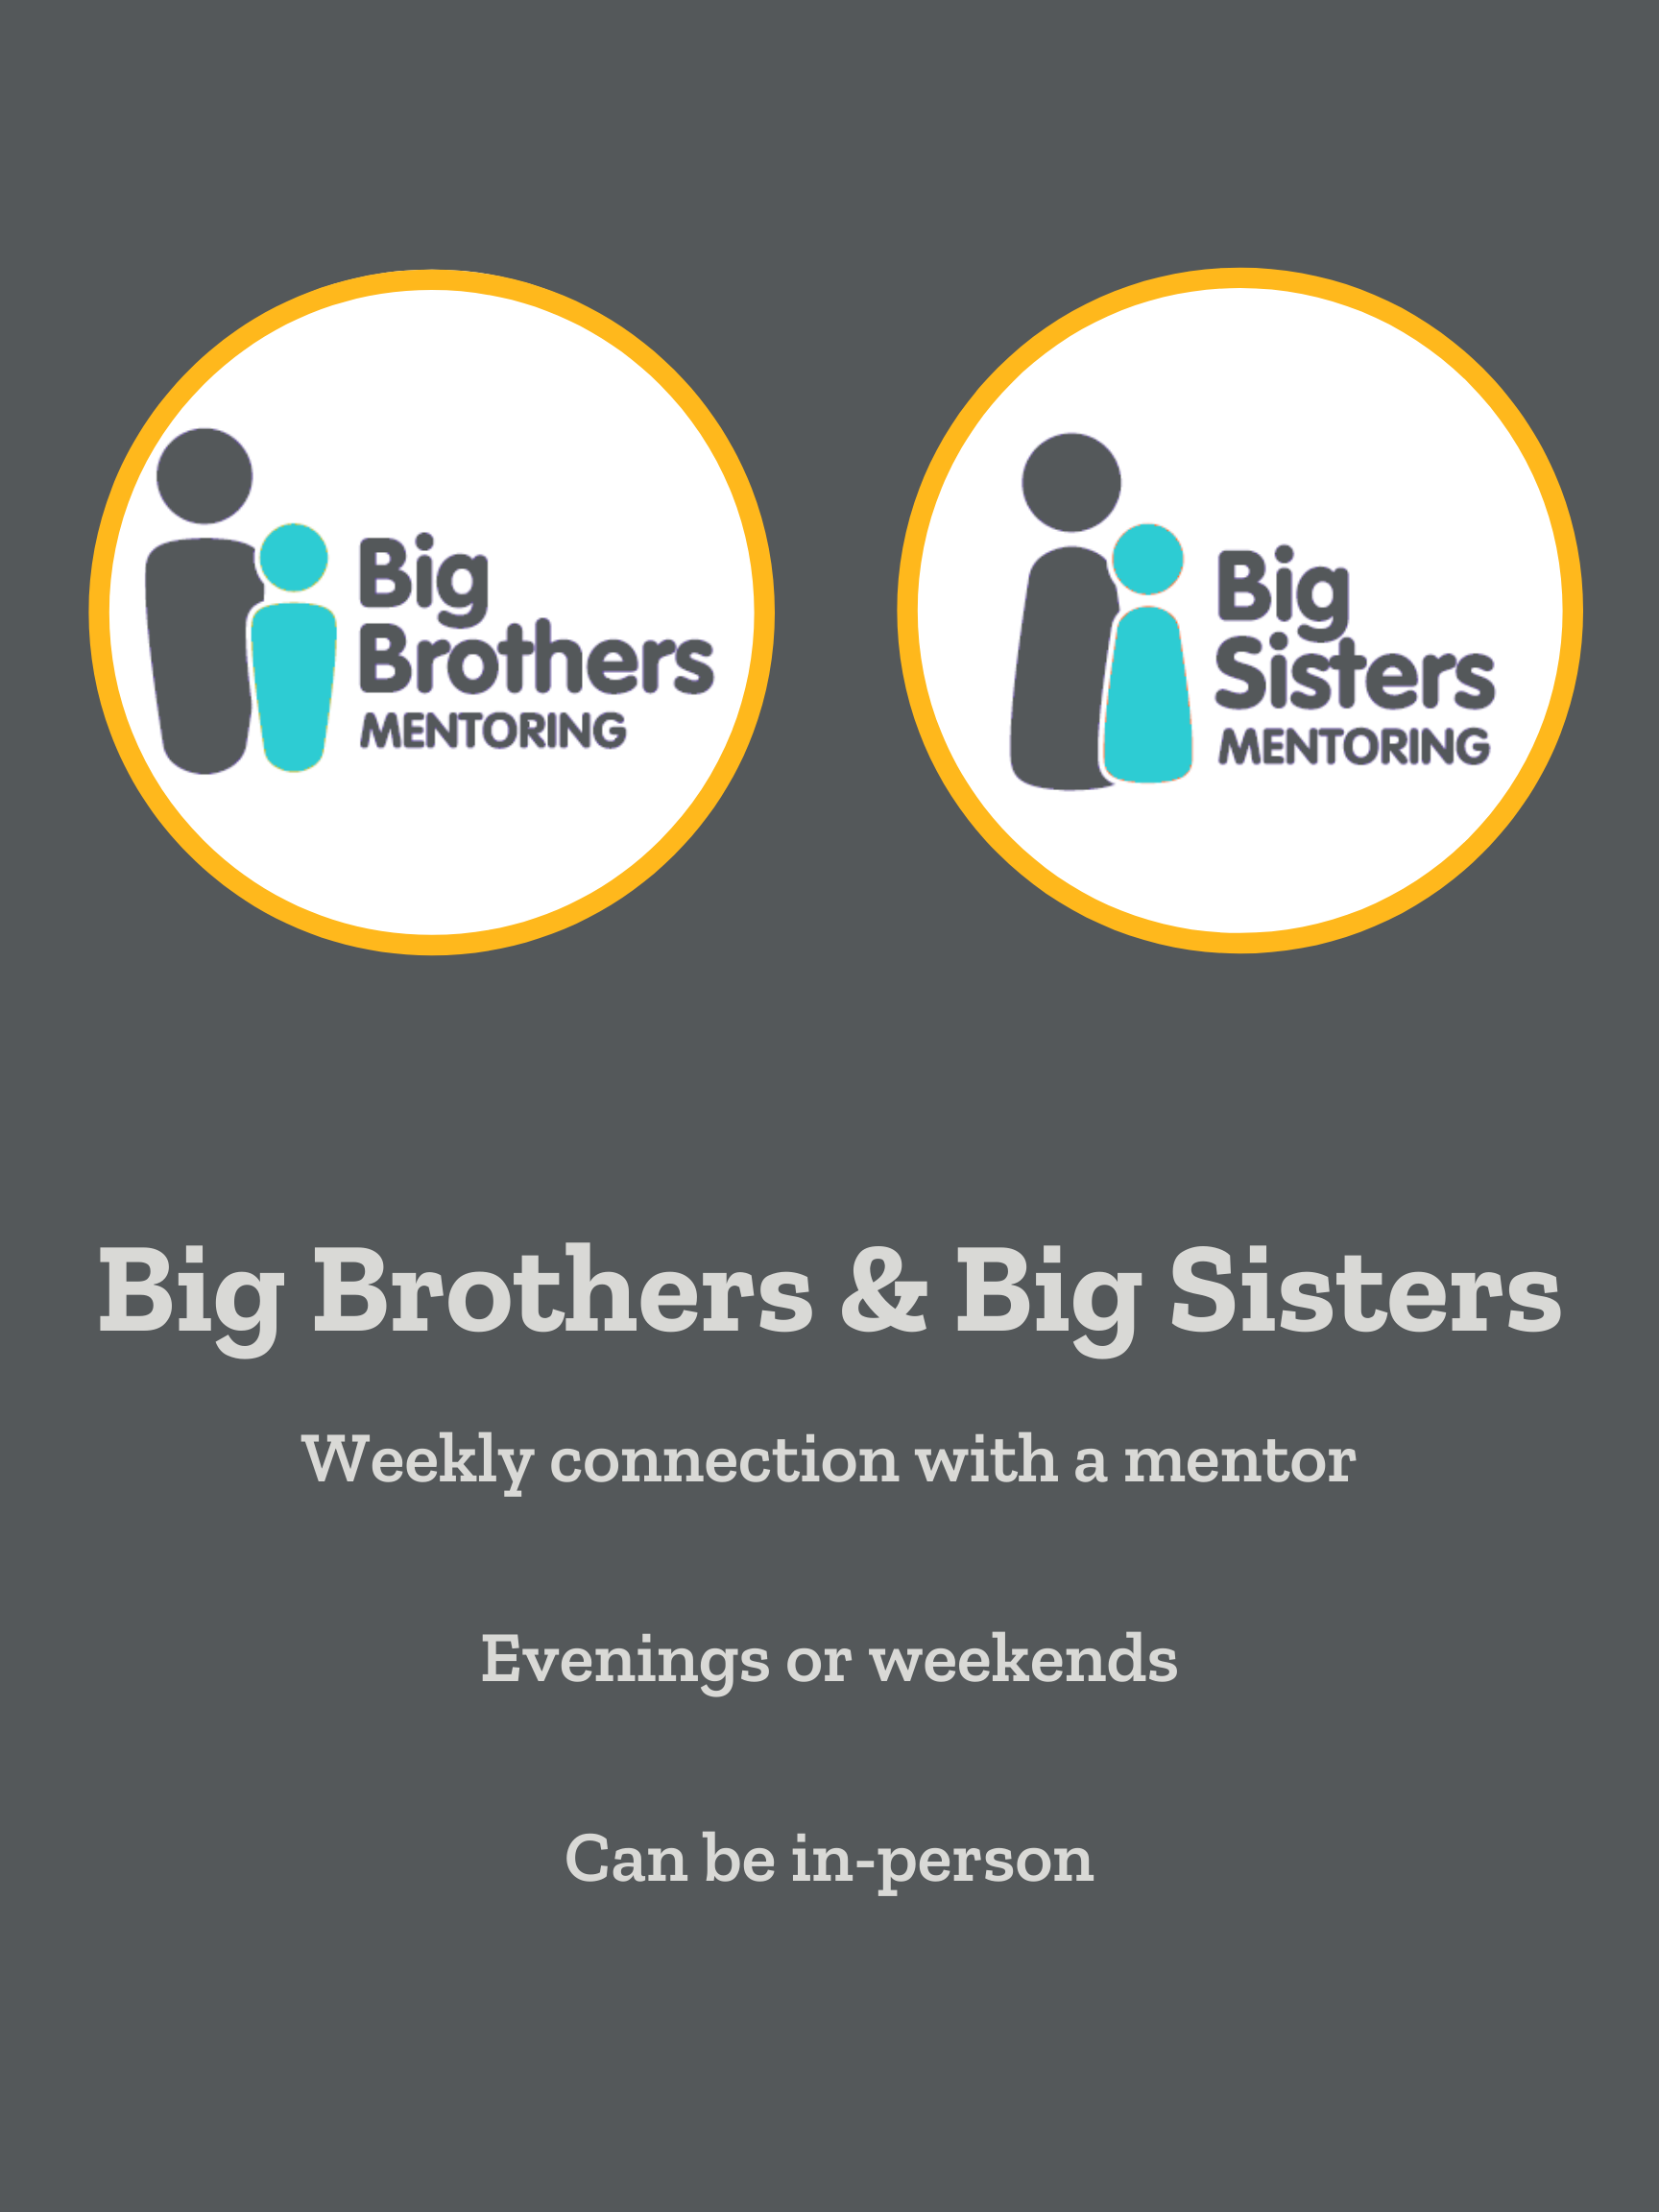 ENROL A YOUNG PERSON - Big Brothers Big Sisters of Guelph